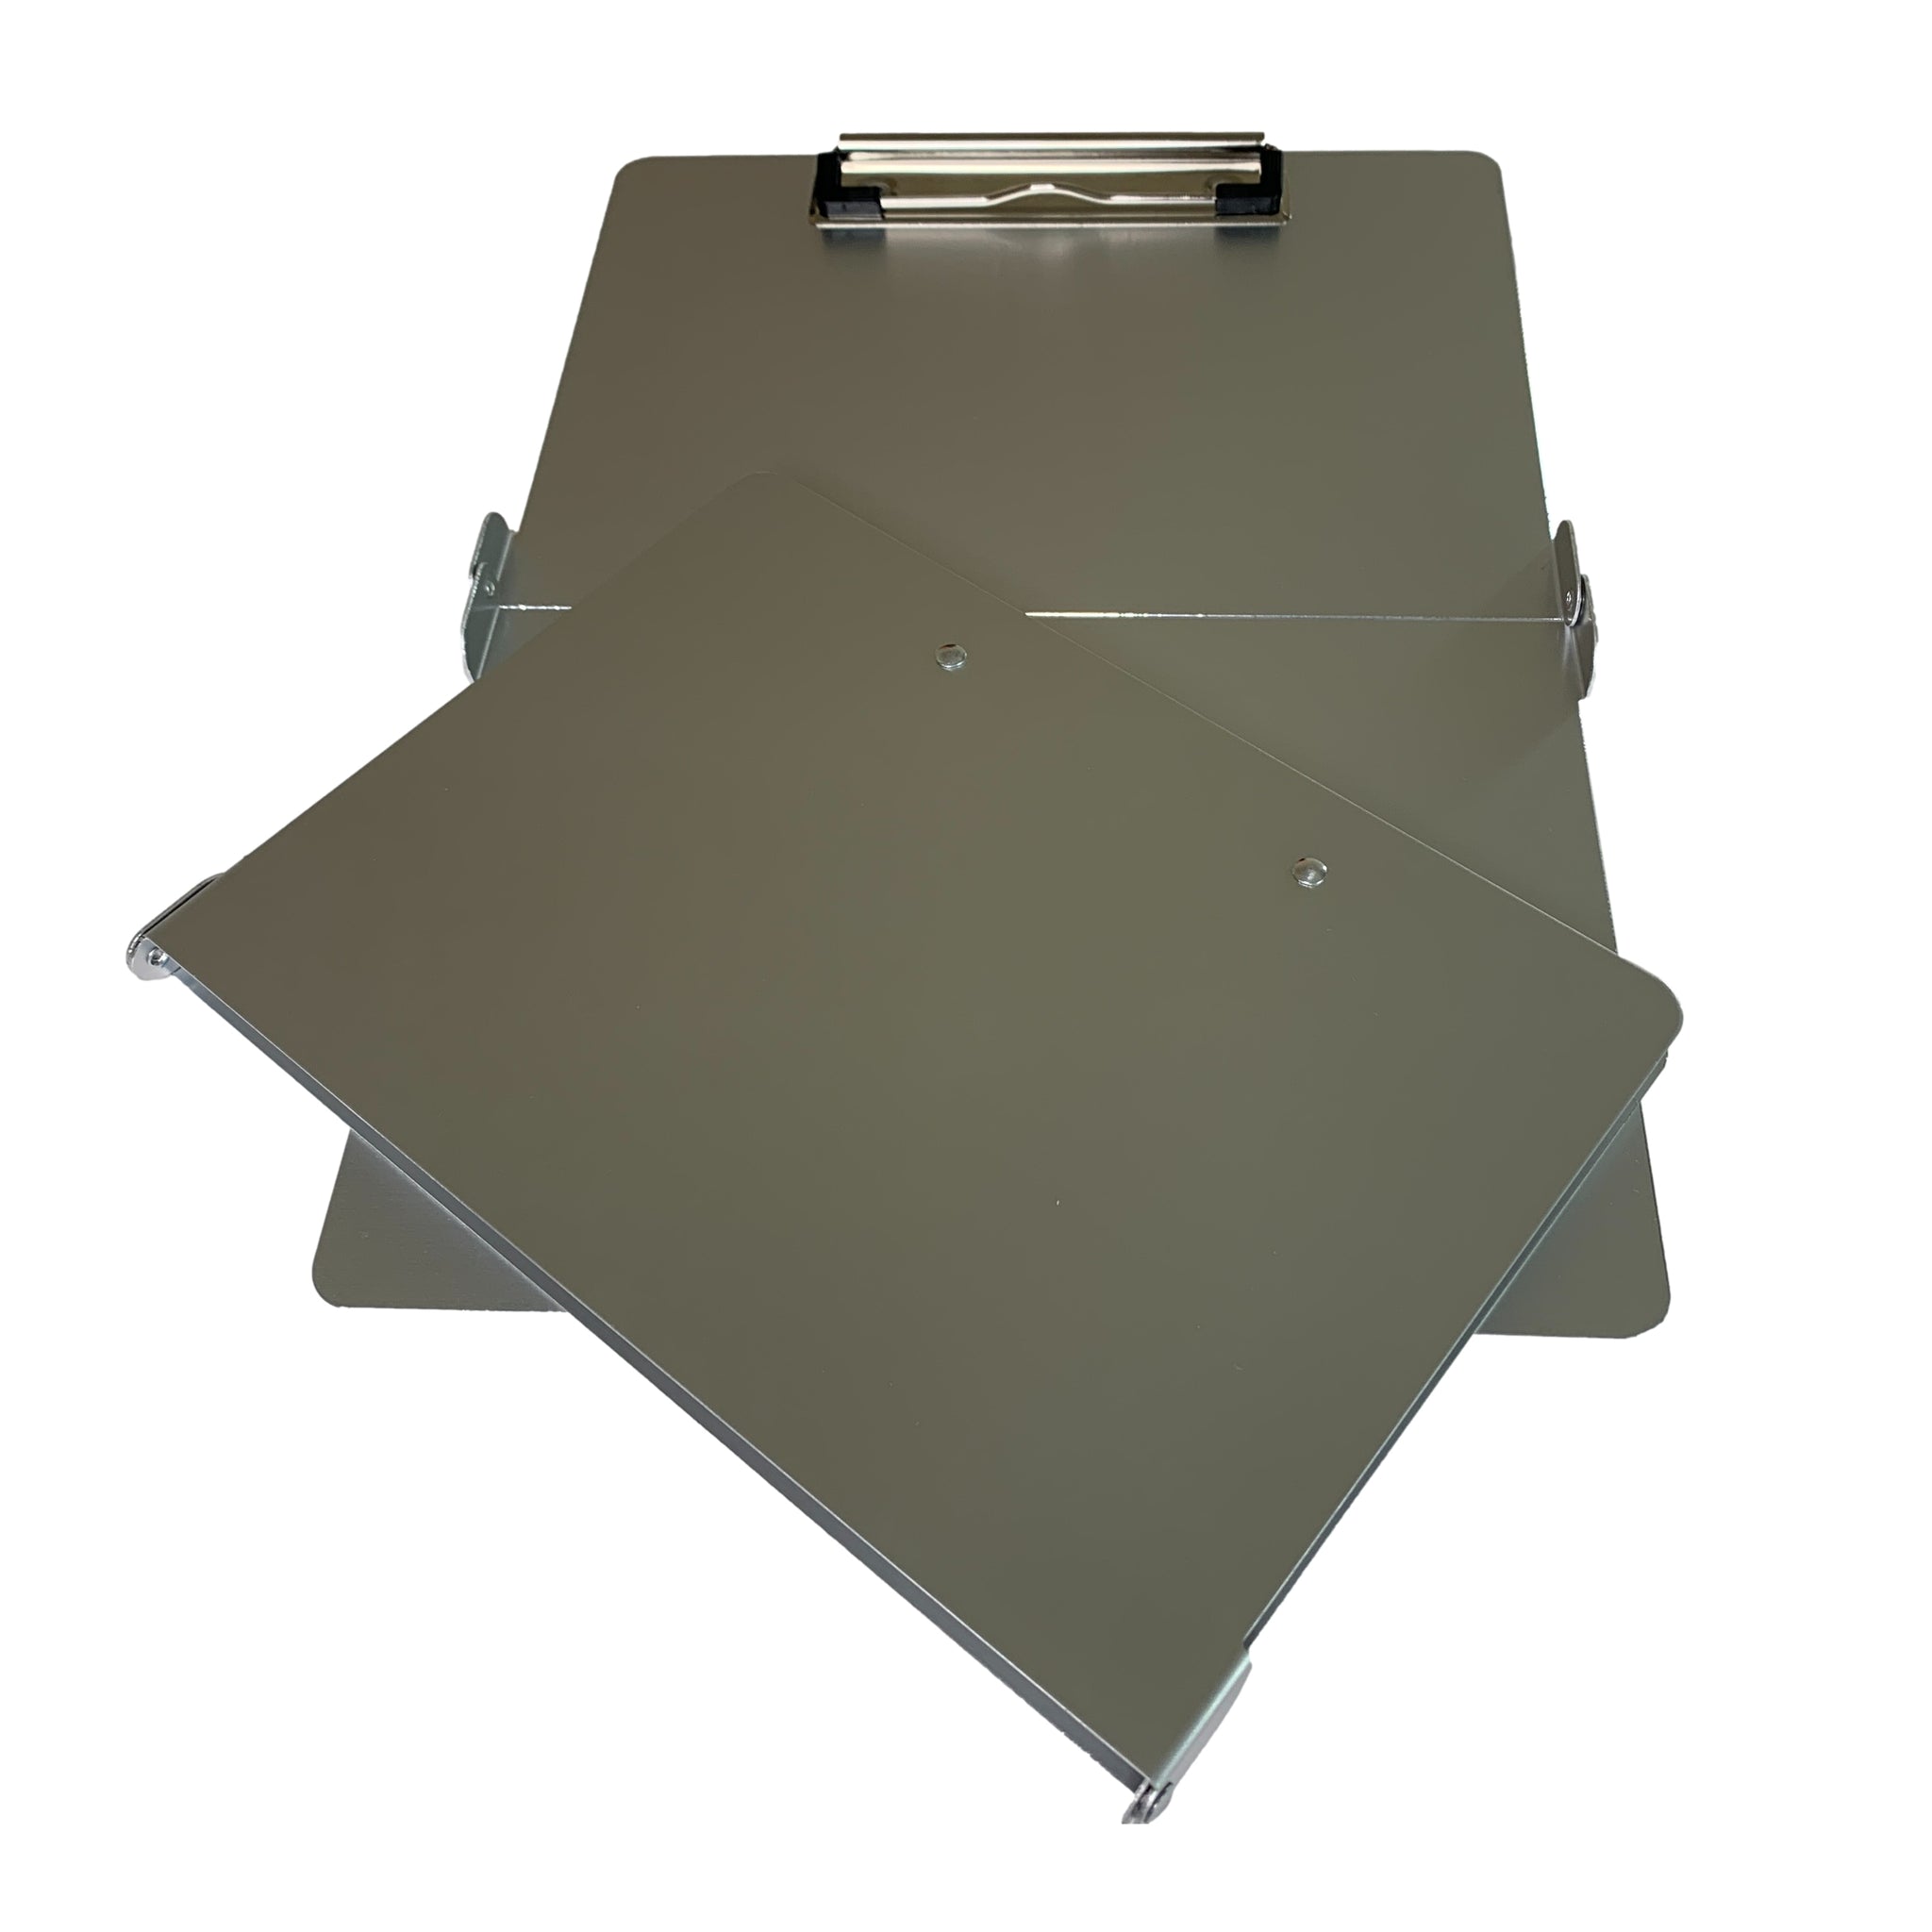 A4 Aluminum Foldable Clipboard by Janrax